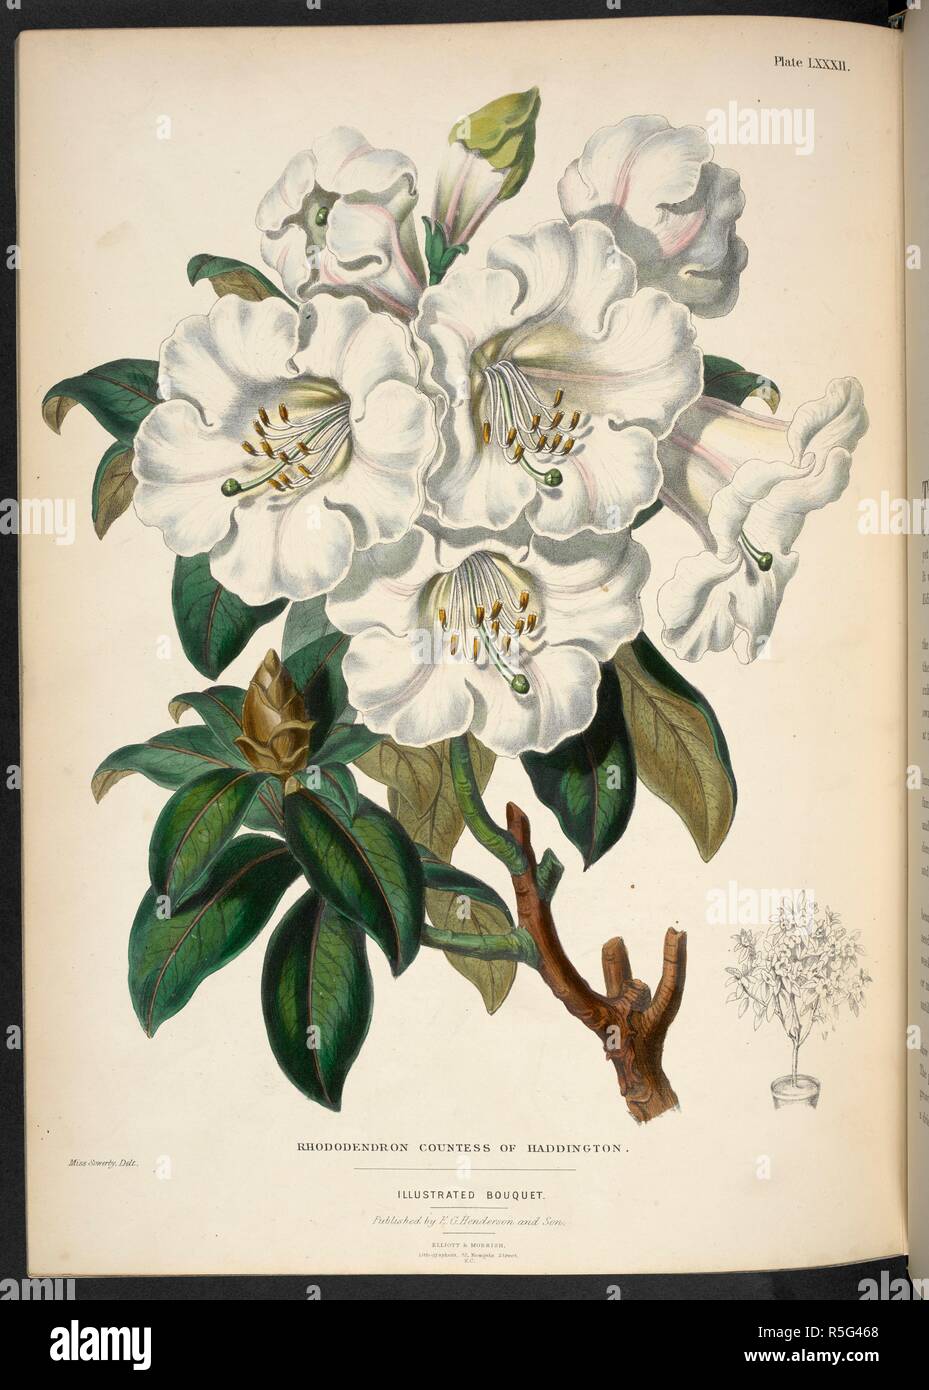 Rhododendron Countess of Haddington. The Illustrated Bouquet, consisting of figures, with descriptions of new flowers. London, 1857-64. Source: 1823.c.13 plate 82. Author: Henderson, Edward George. Sowerby, Miss. Stock Photo